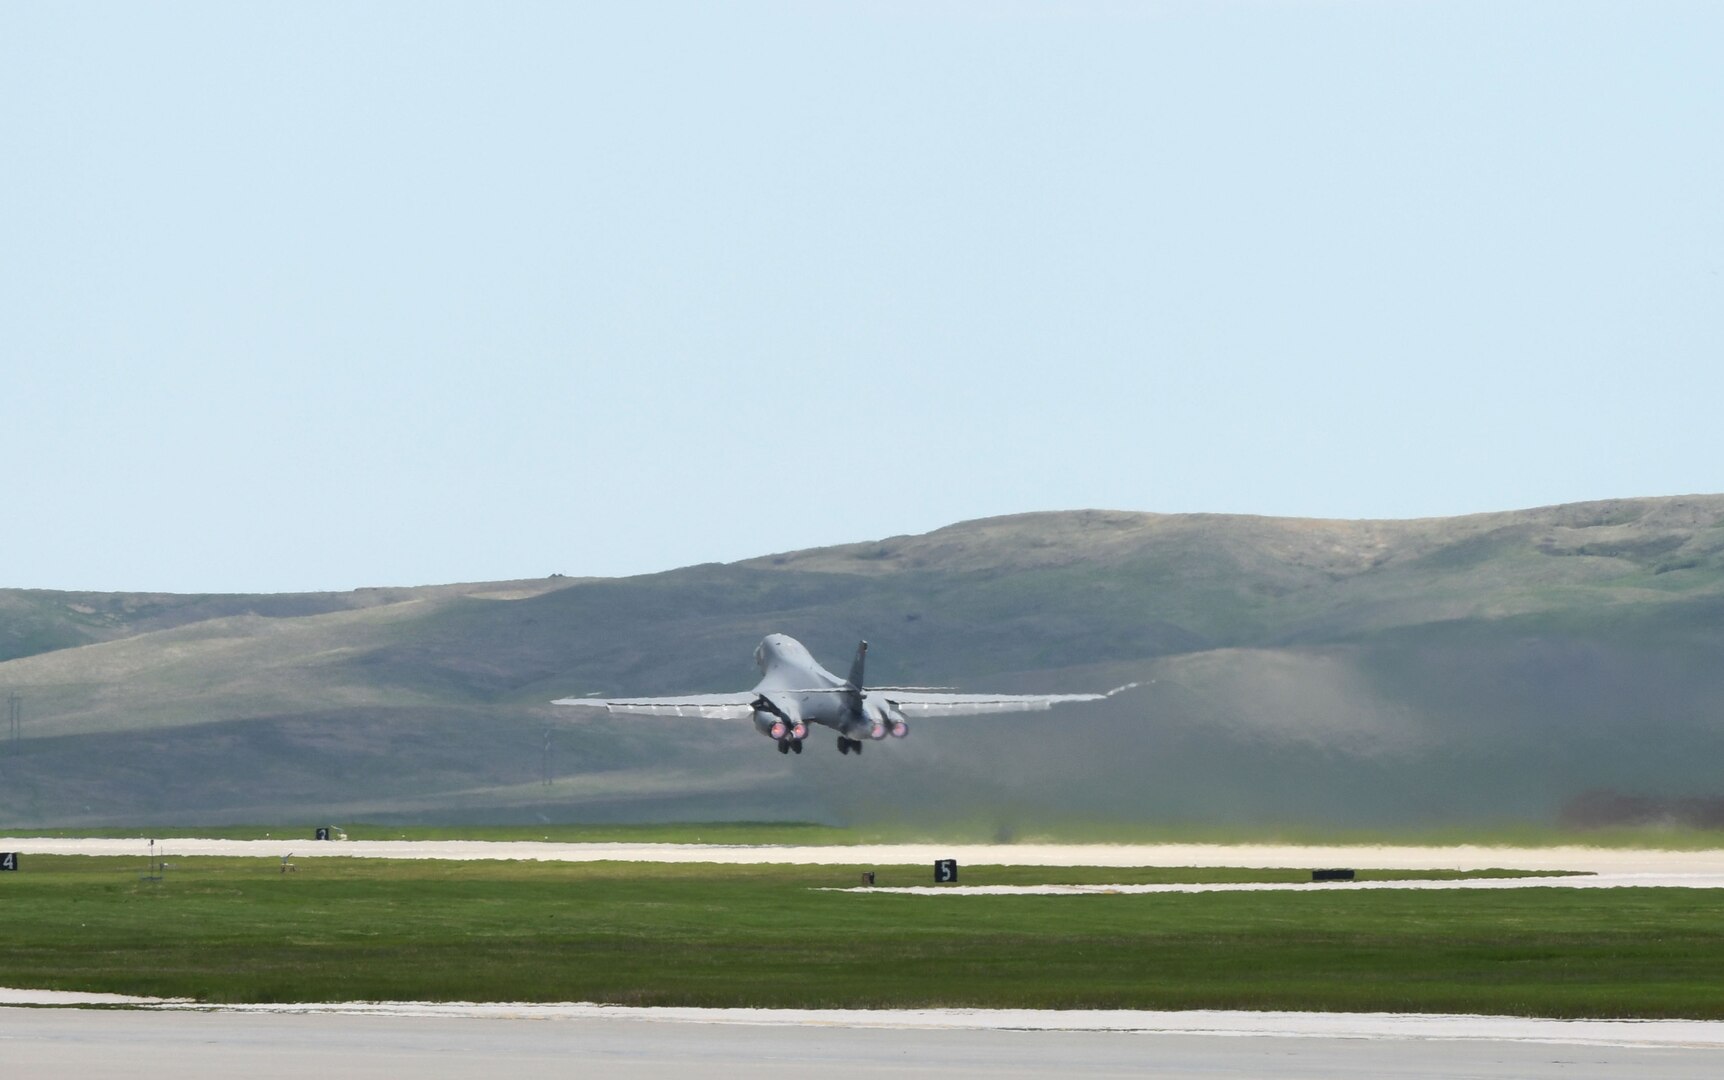 A 34th Bomb Squadron B-1B Lancer launches from Ellsworth Air Force Base, S.D., May 19, 2020, to conduct a long-range, long-duration Bomber Task Force mission within the U.S. European Command area of responsibility. BTF missions provide opportunities to work and train with U.S. allies and partners, while strengthening capabilities by familiarizing aircrew with air bases and operations in different parts of the world. (U.S. Air Force photo by Airman 1st Class Christina Bennett)